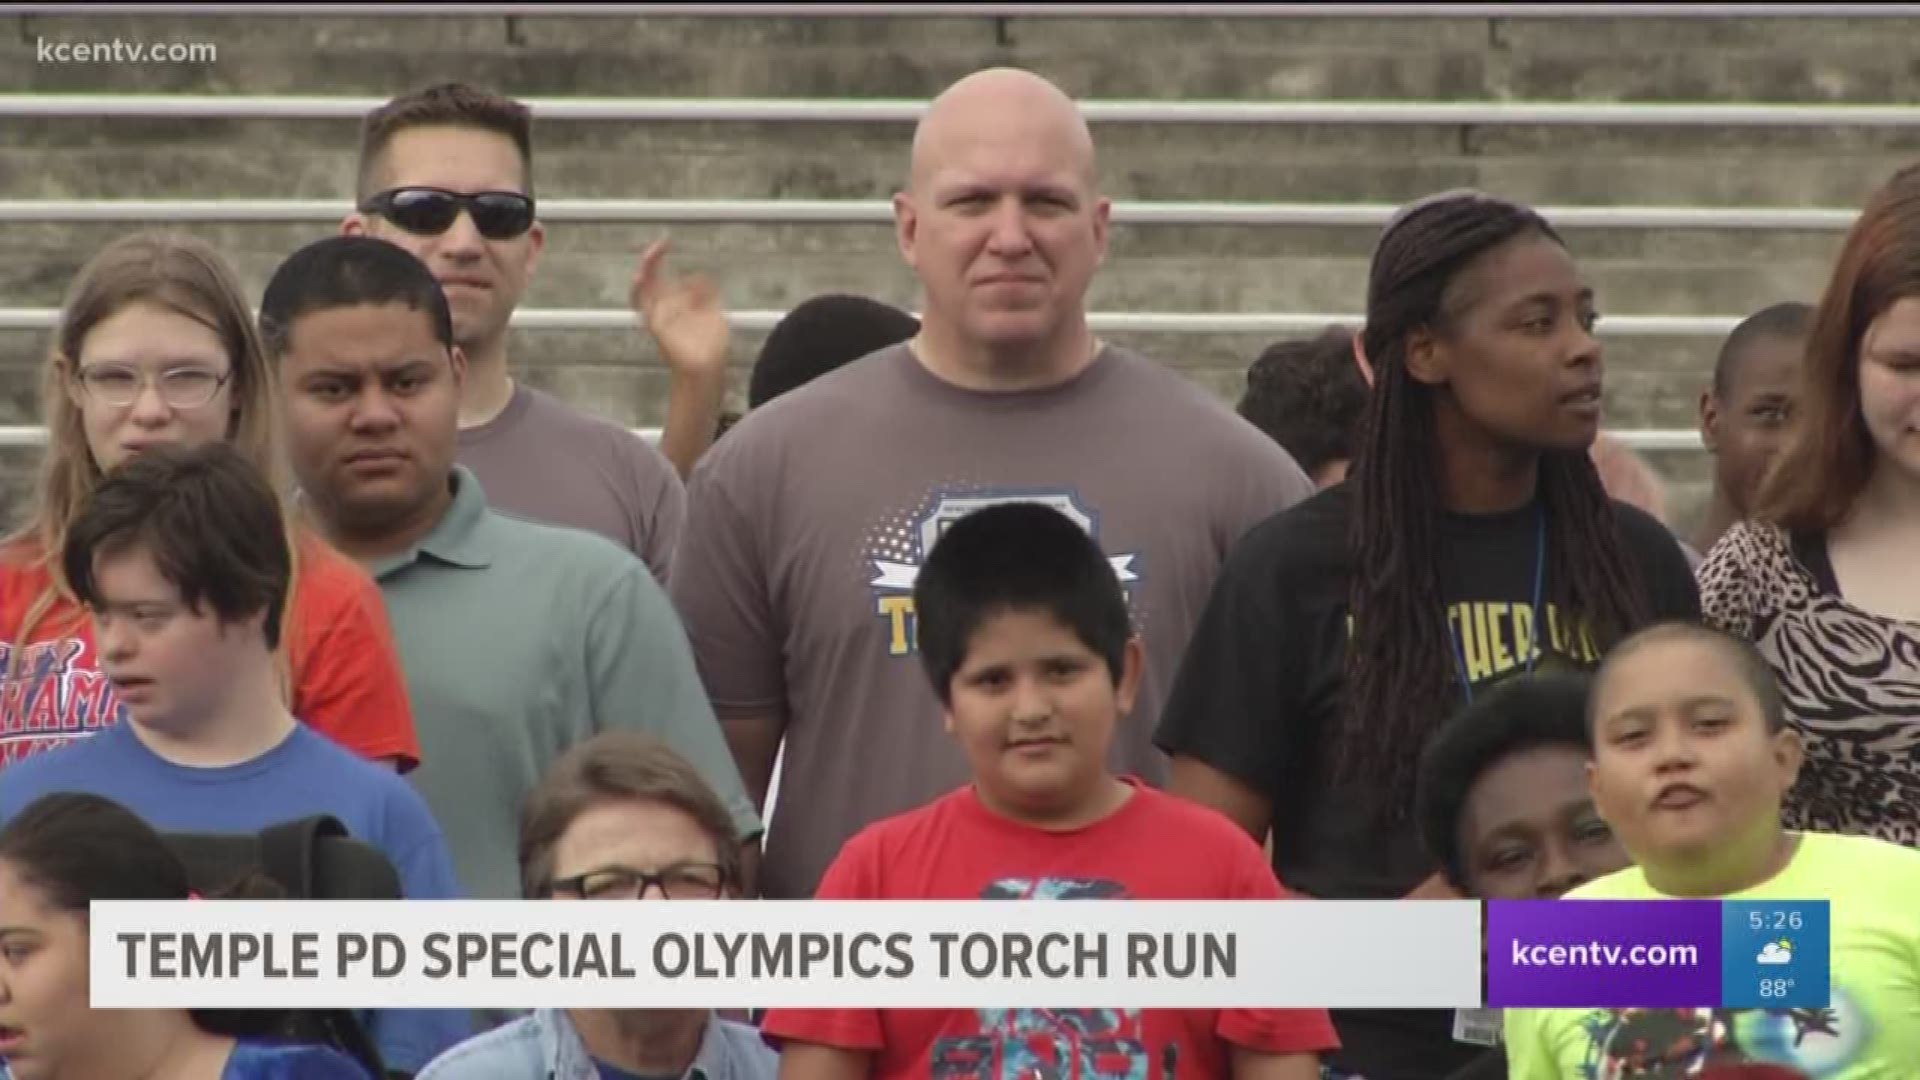 The Temple Police Department took part in a torch run for the Special Olympics today. 